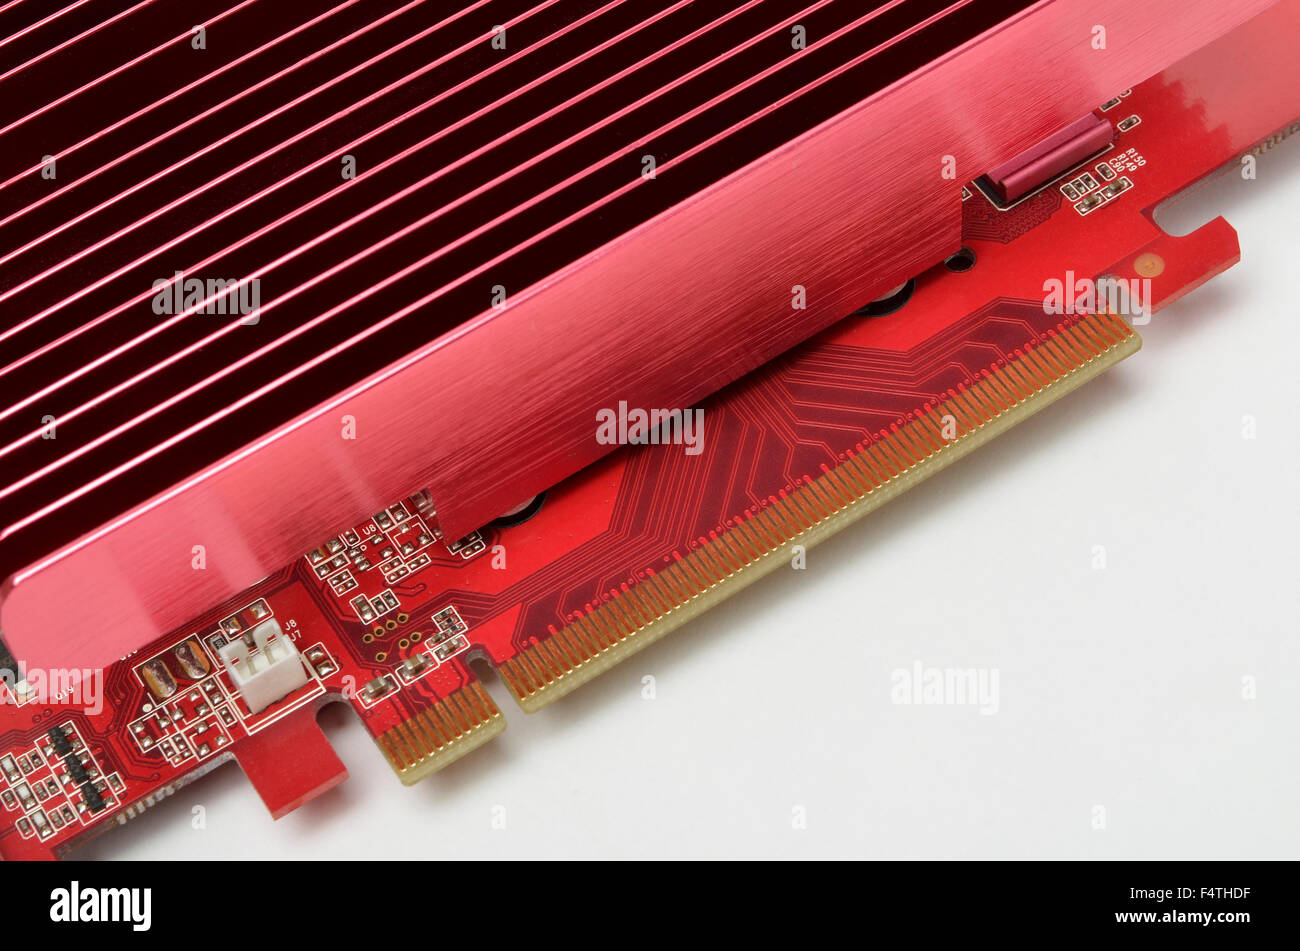 PCI Express X16 contacts and heat sink on a Gainward NVidia graphics card. Stock Photo